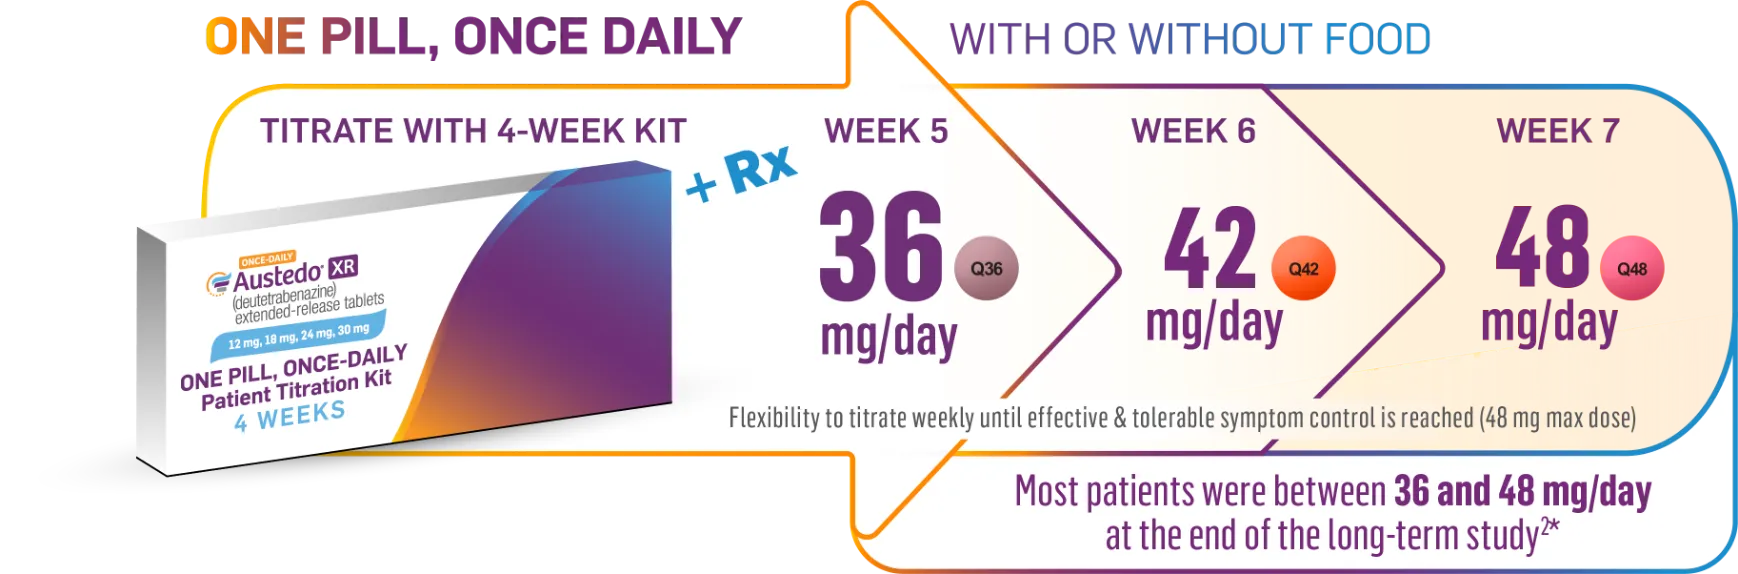 Graphic representing dosing up to 48 mg/day with once pill, once-daily AUSTEDO XR. Patients reach 30 mg/day with Titration Kit at the end of Week 4. Most patients were between 36 mg/day and 48 mg/day at the end of the long-term study.